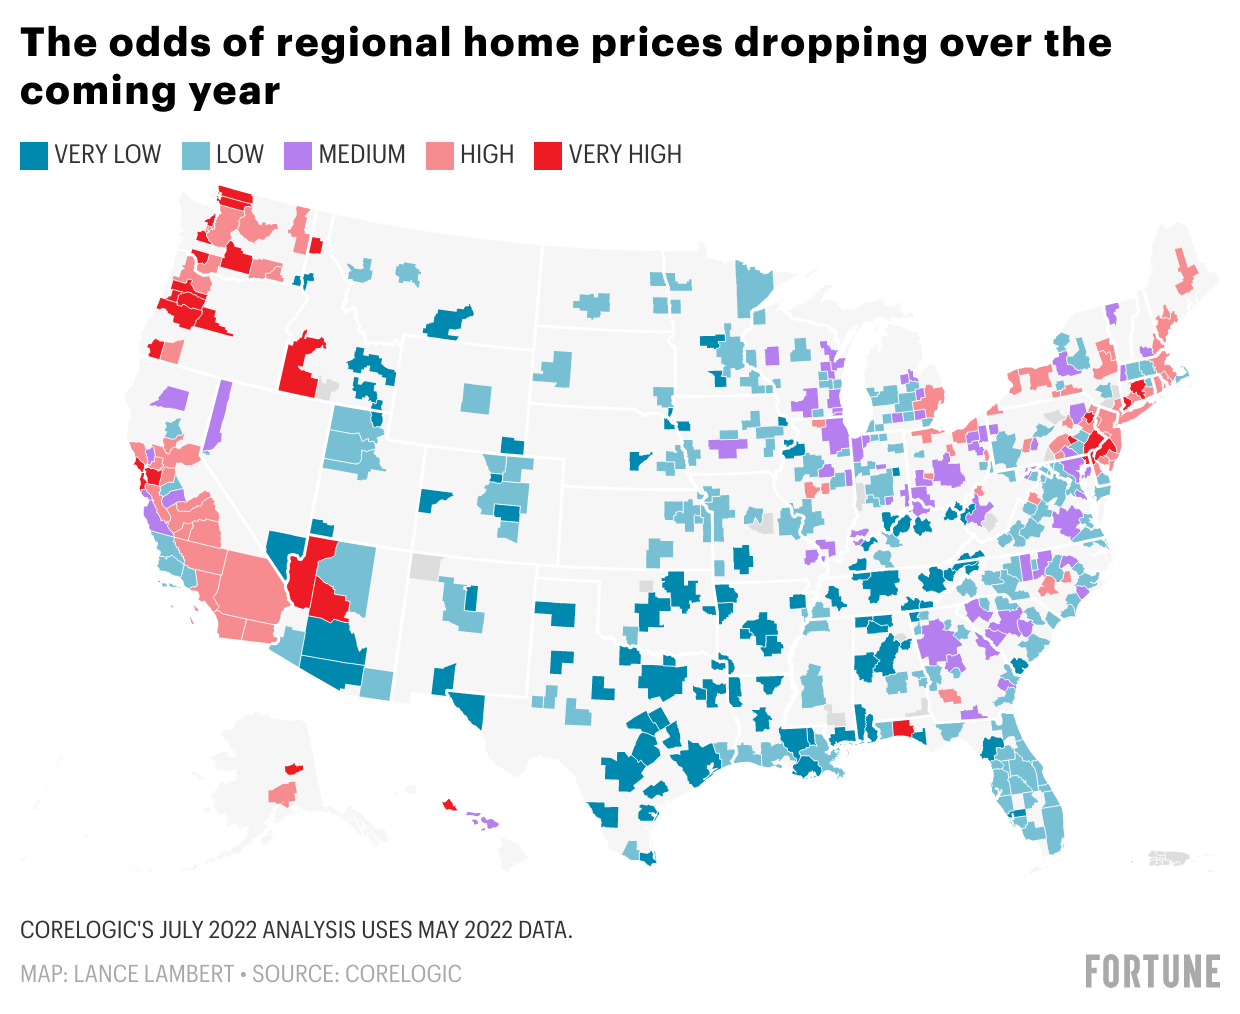 6wRIG-the-odds-of-regional-home-prices-dropping-over-the-coming-year.png